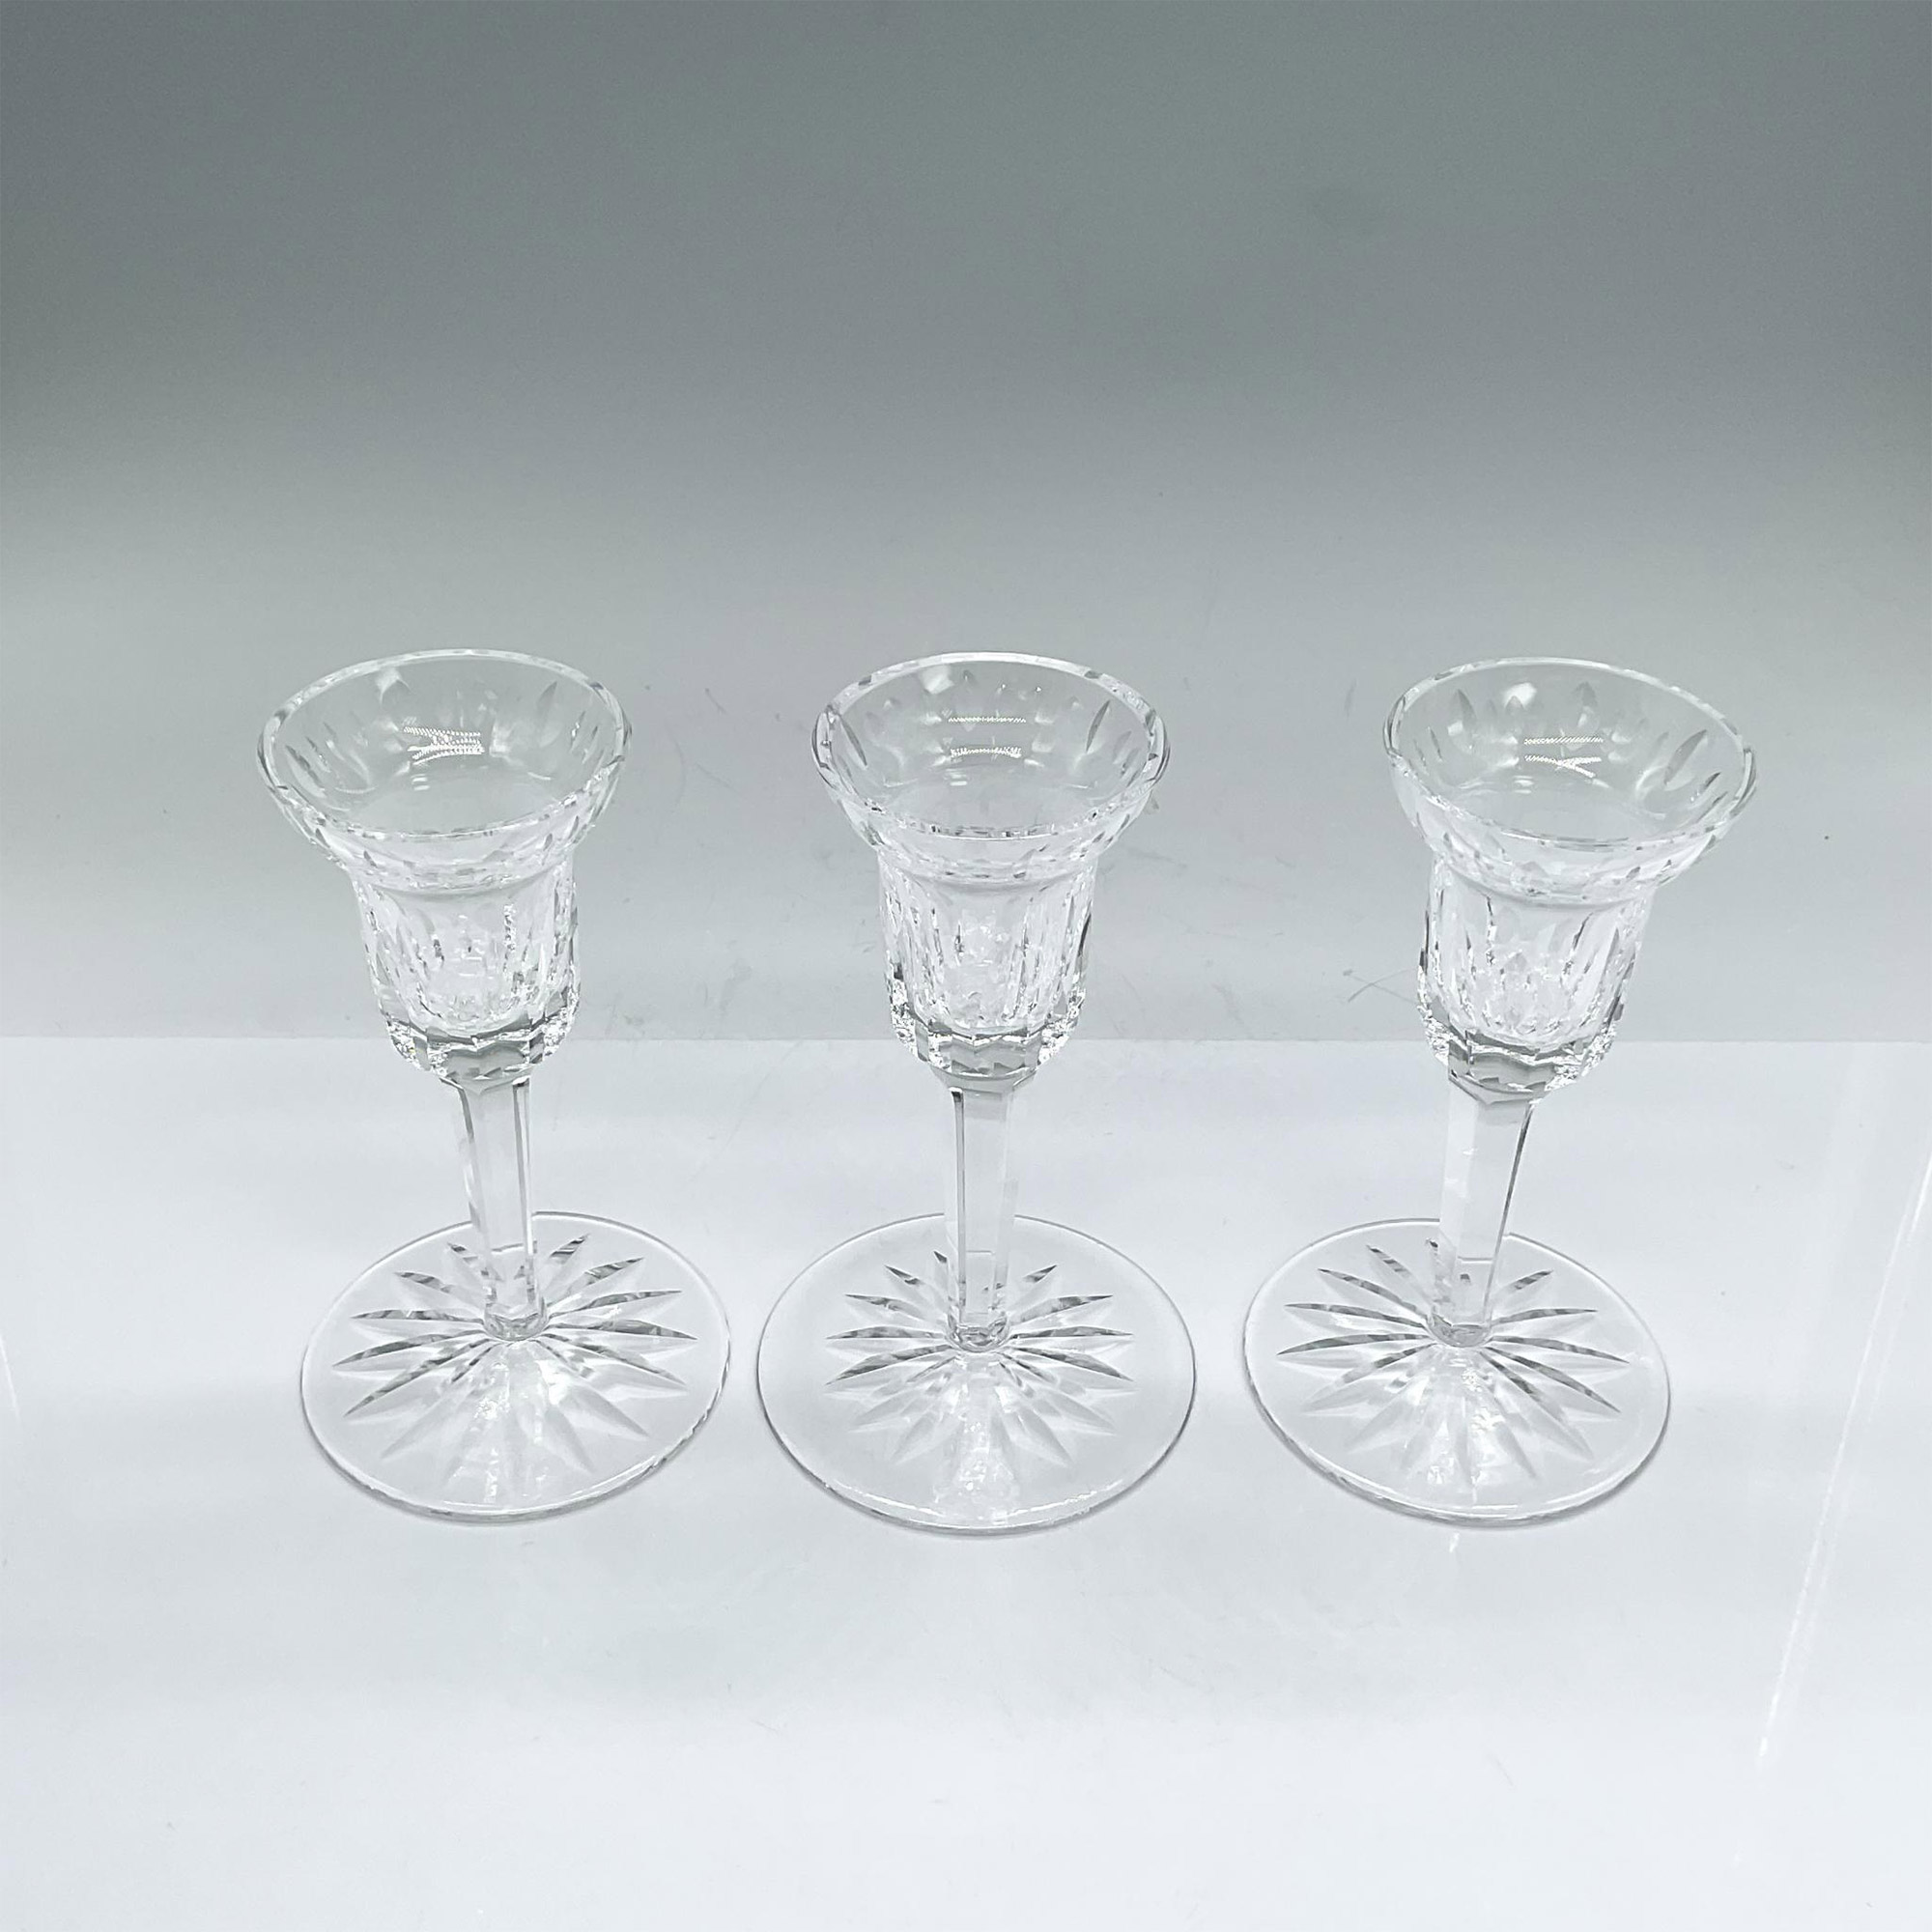 3pc Waterford Crystal Candlesticks - Image 2 of 3